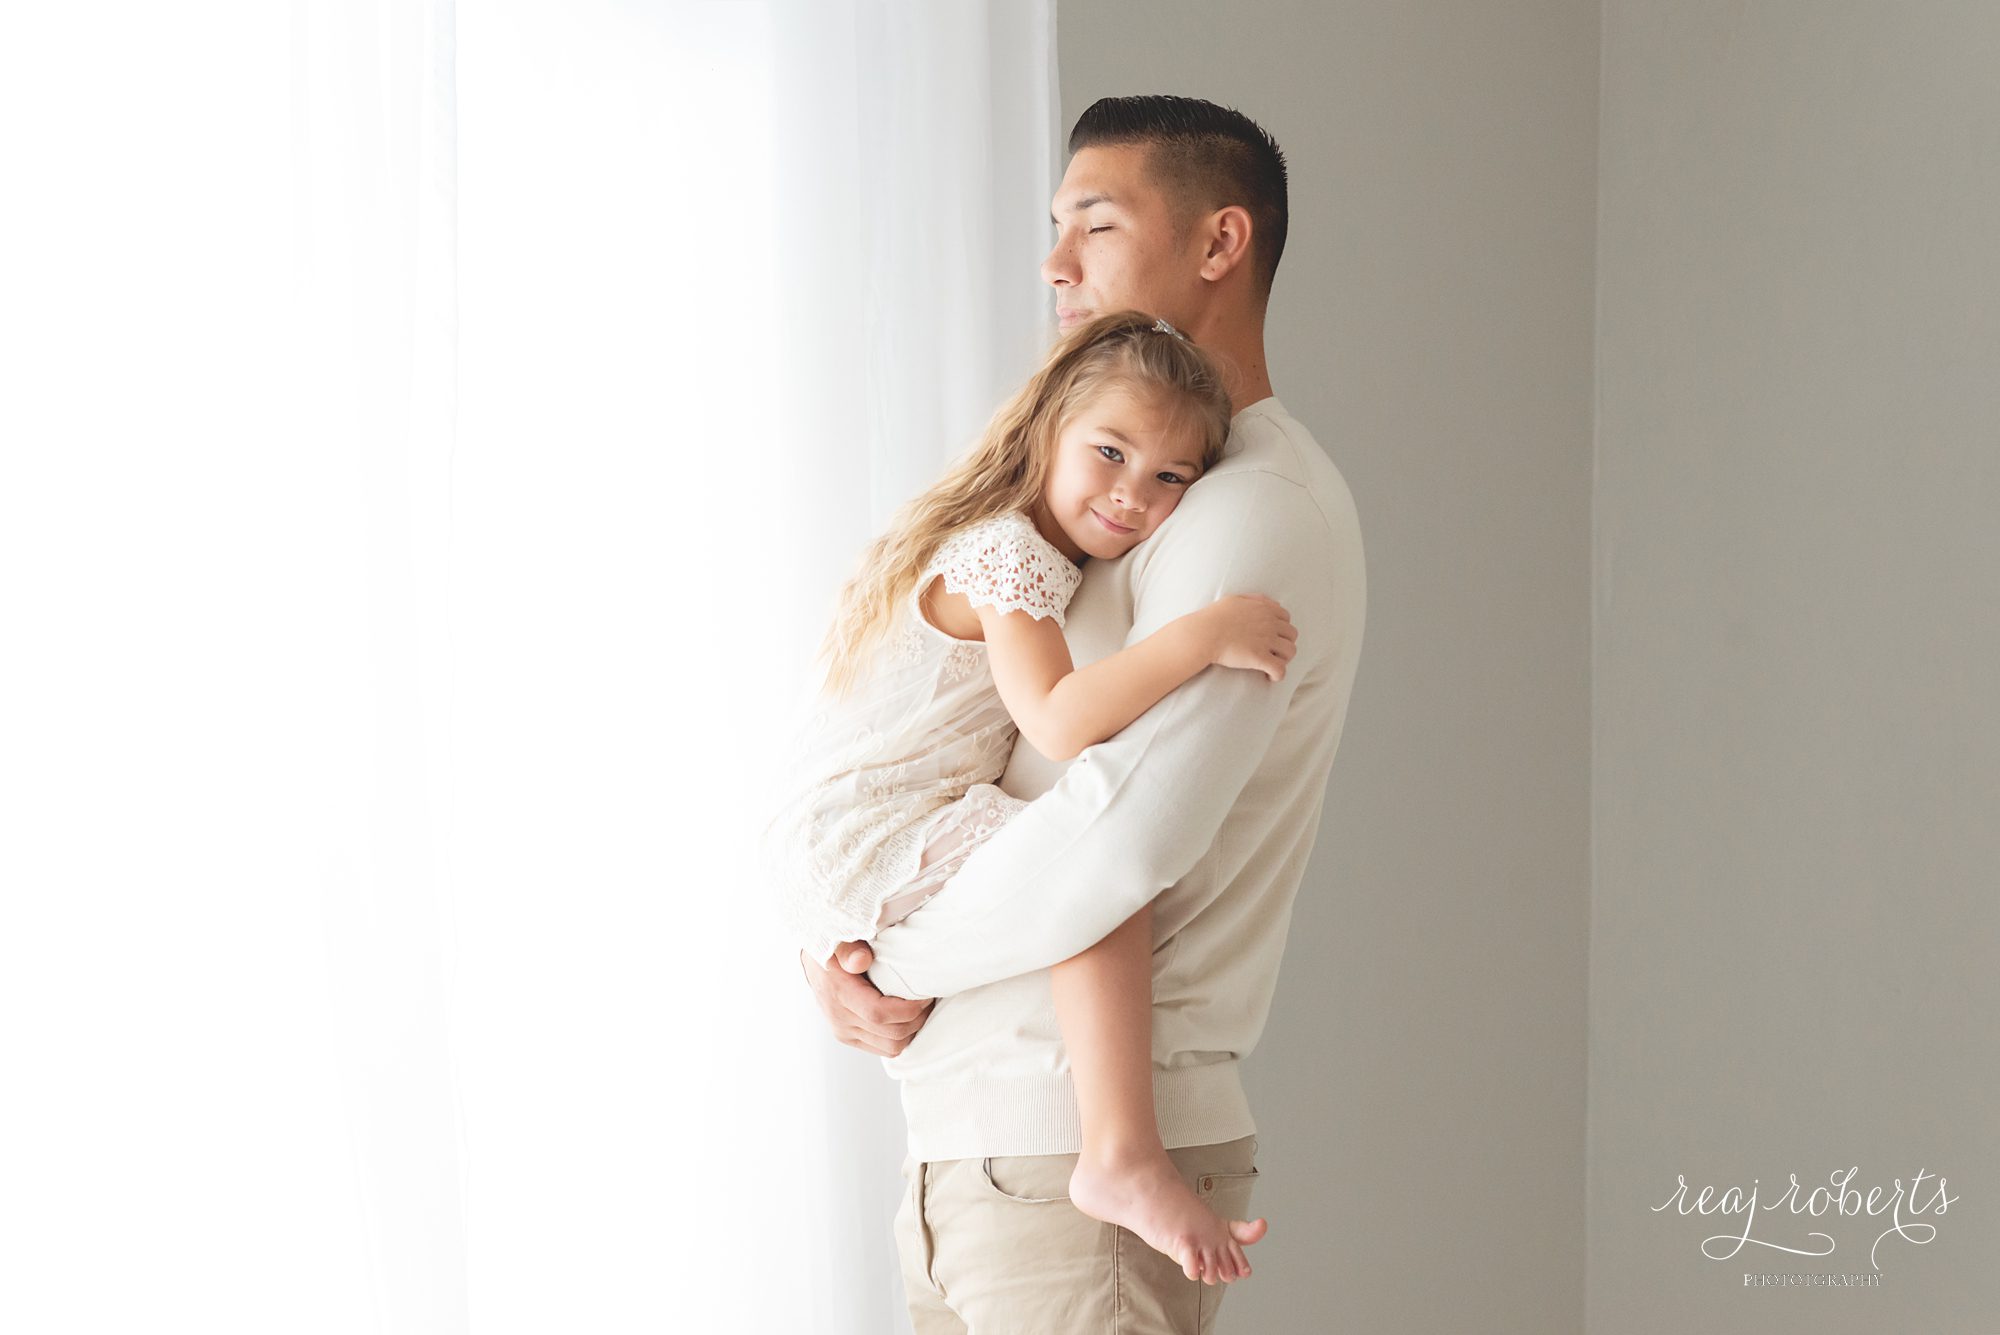 Fatherhood photos with daughters by Chandler photographer Reaj Roberts Photography